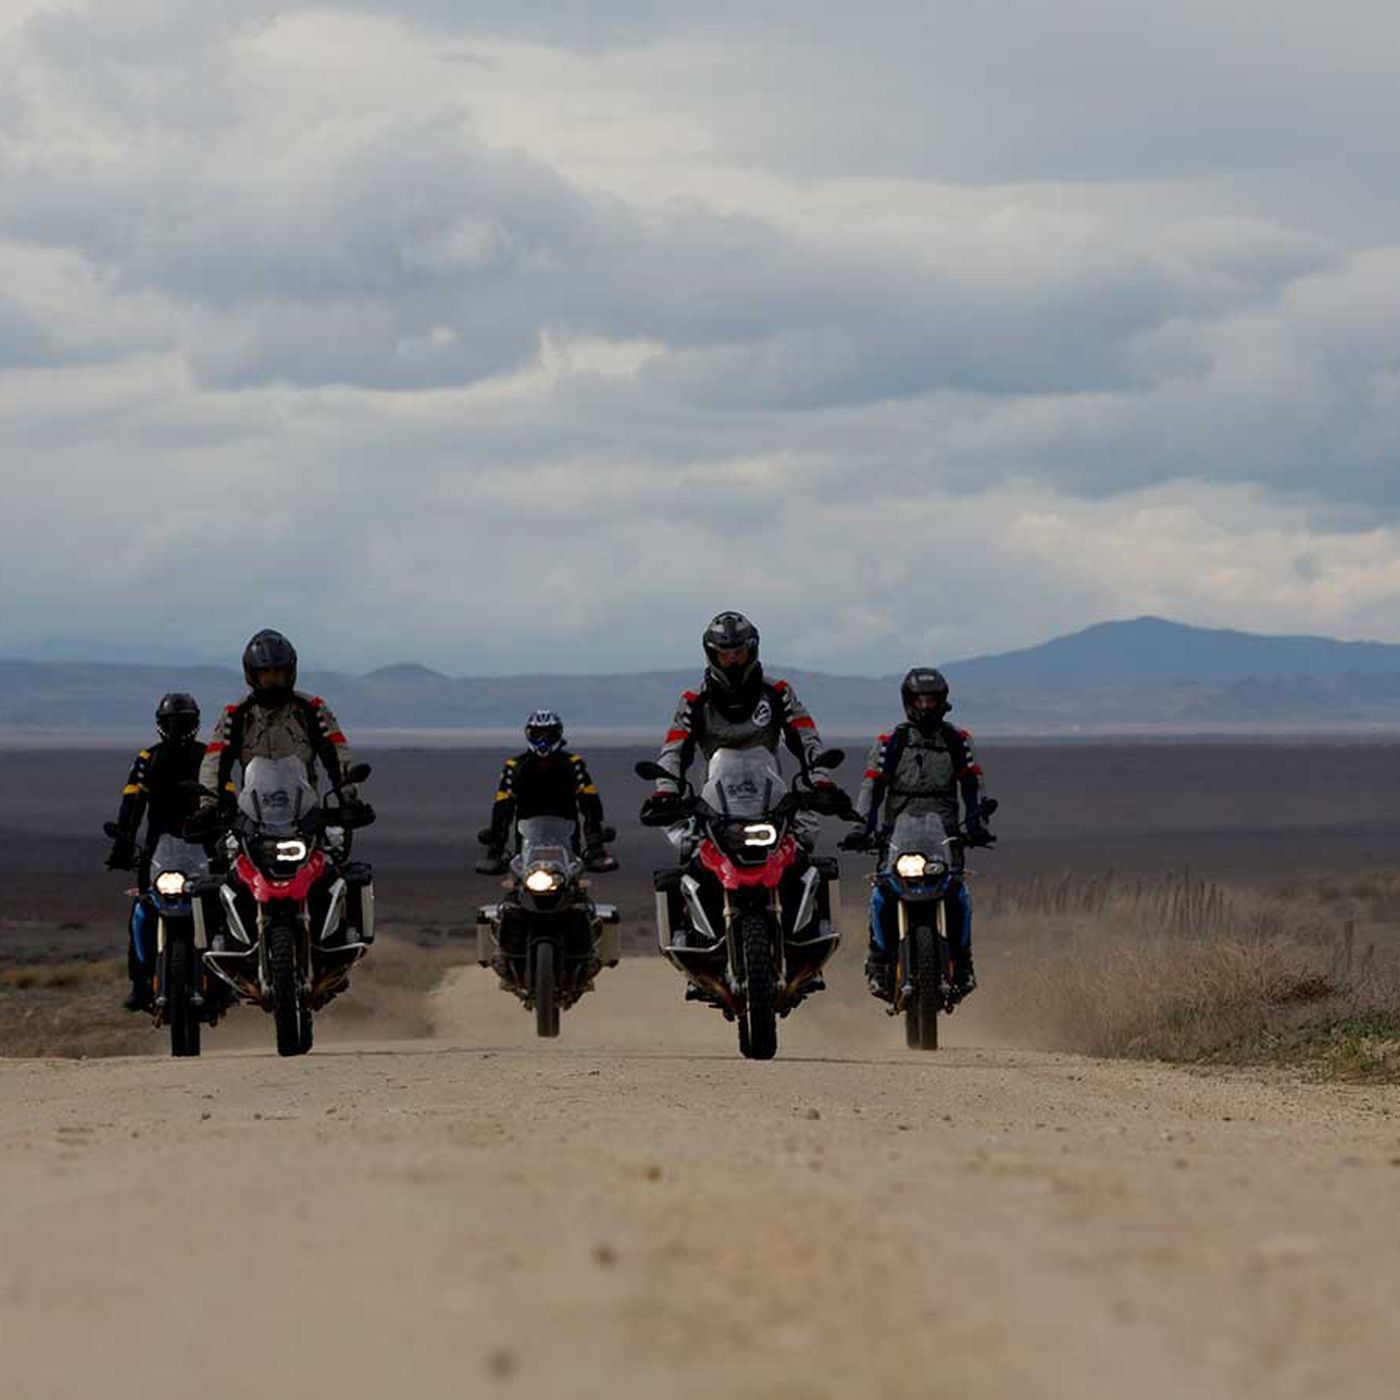 A group of BMW GS motorcycle riders approach the camera on a dirt road